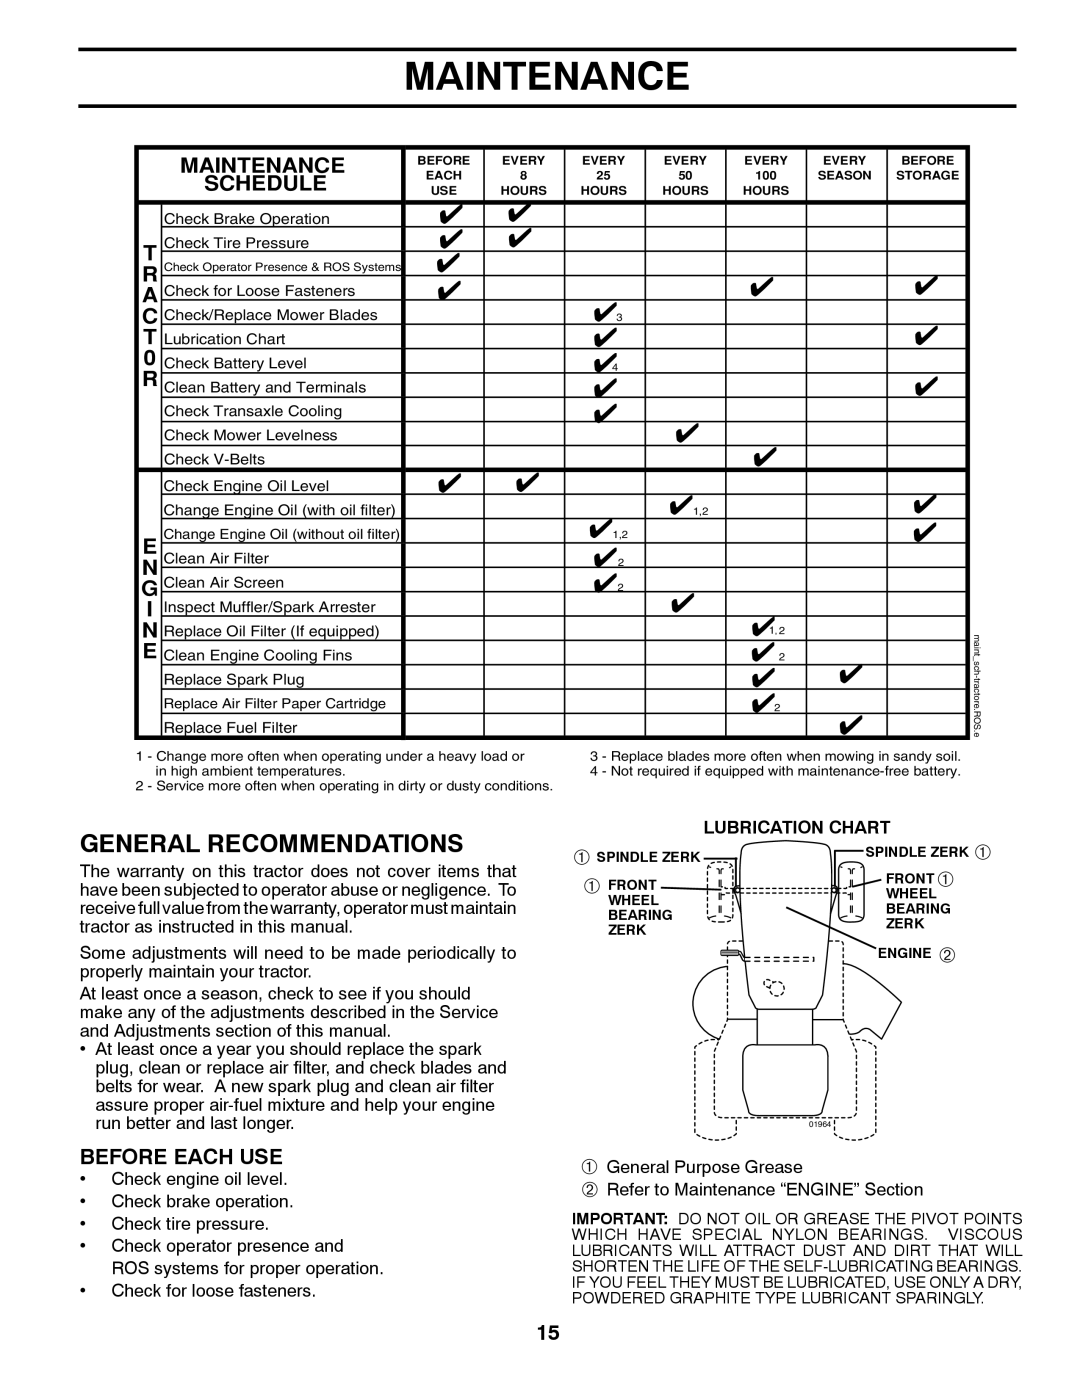 Poulan 96042003600 manual General Recommendations, Maintenance, Schedule, Before Each USE 